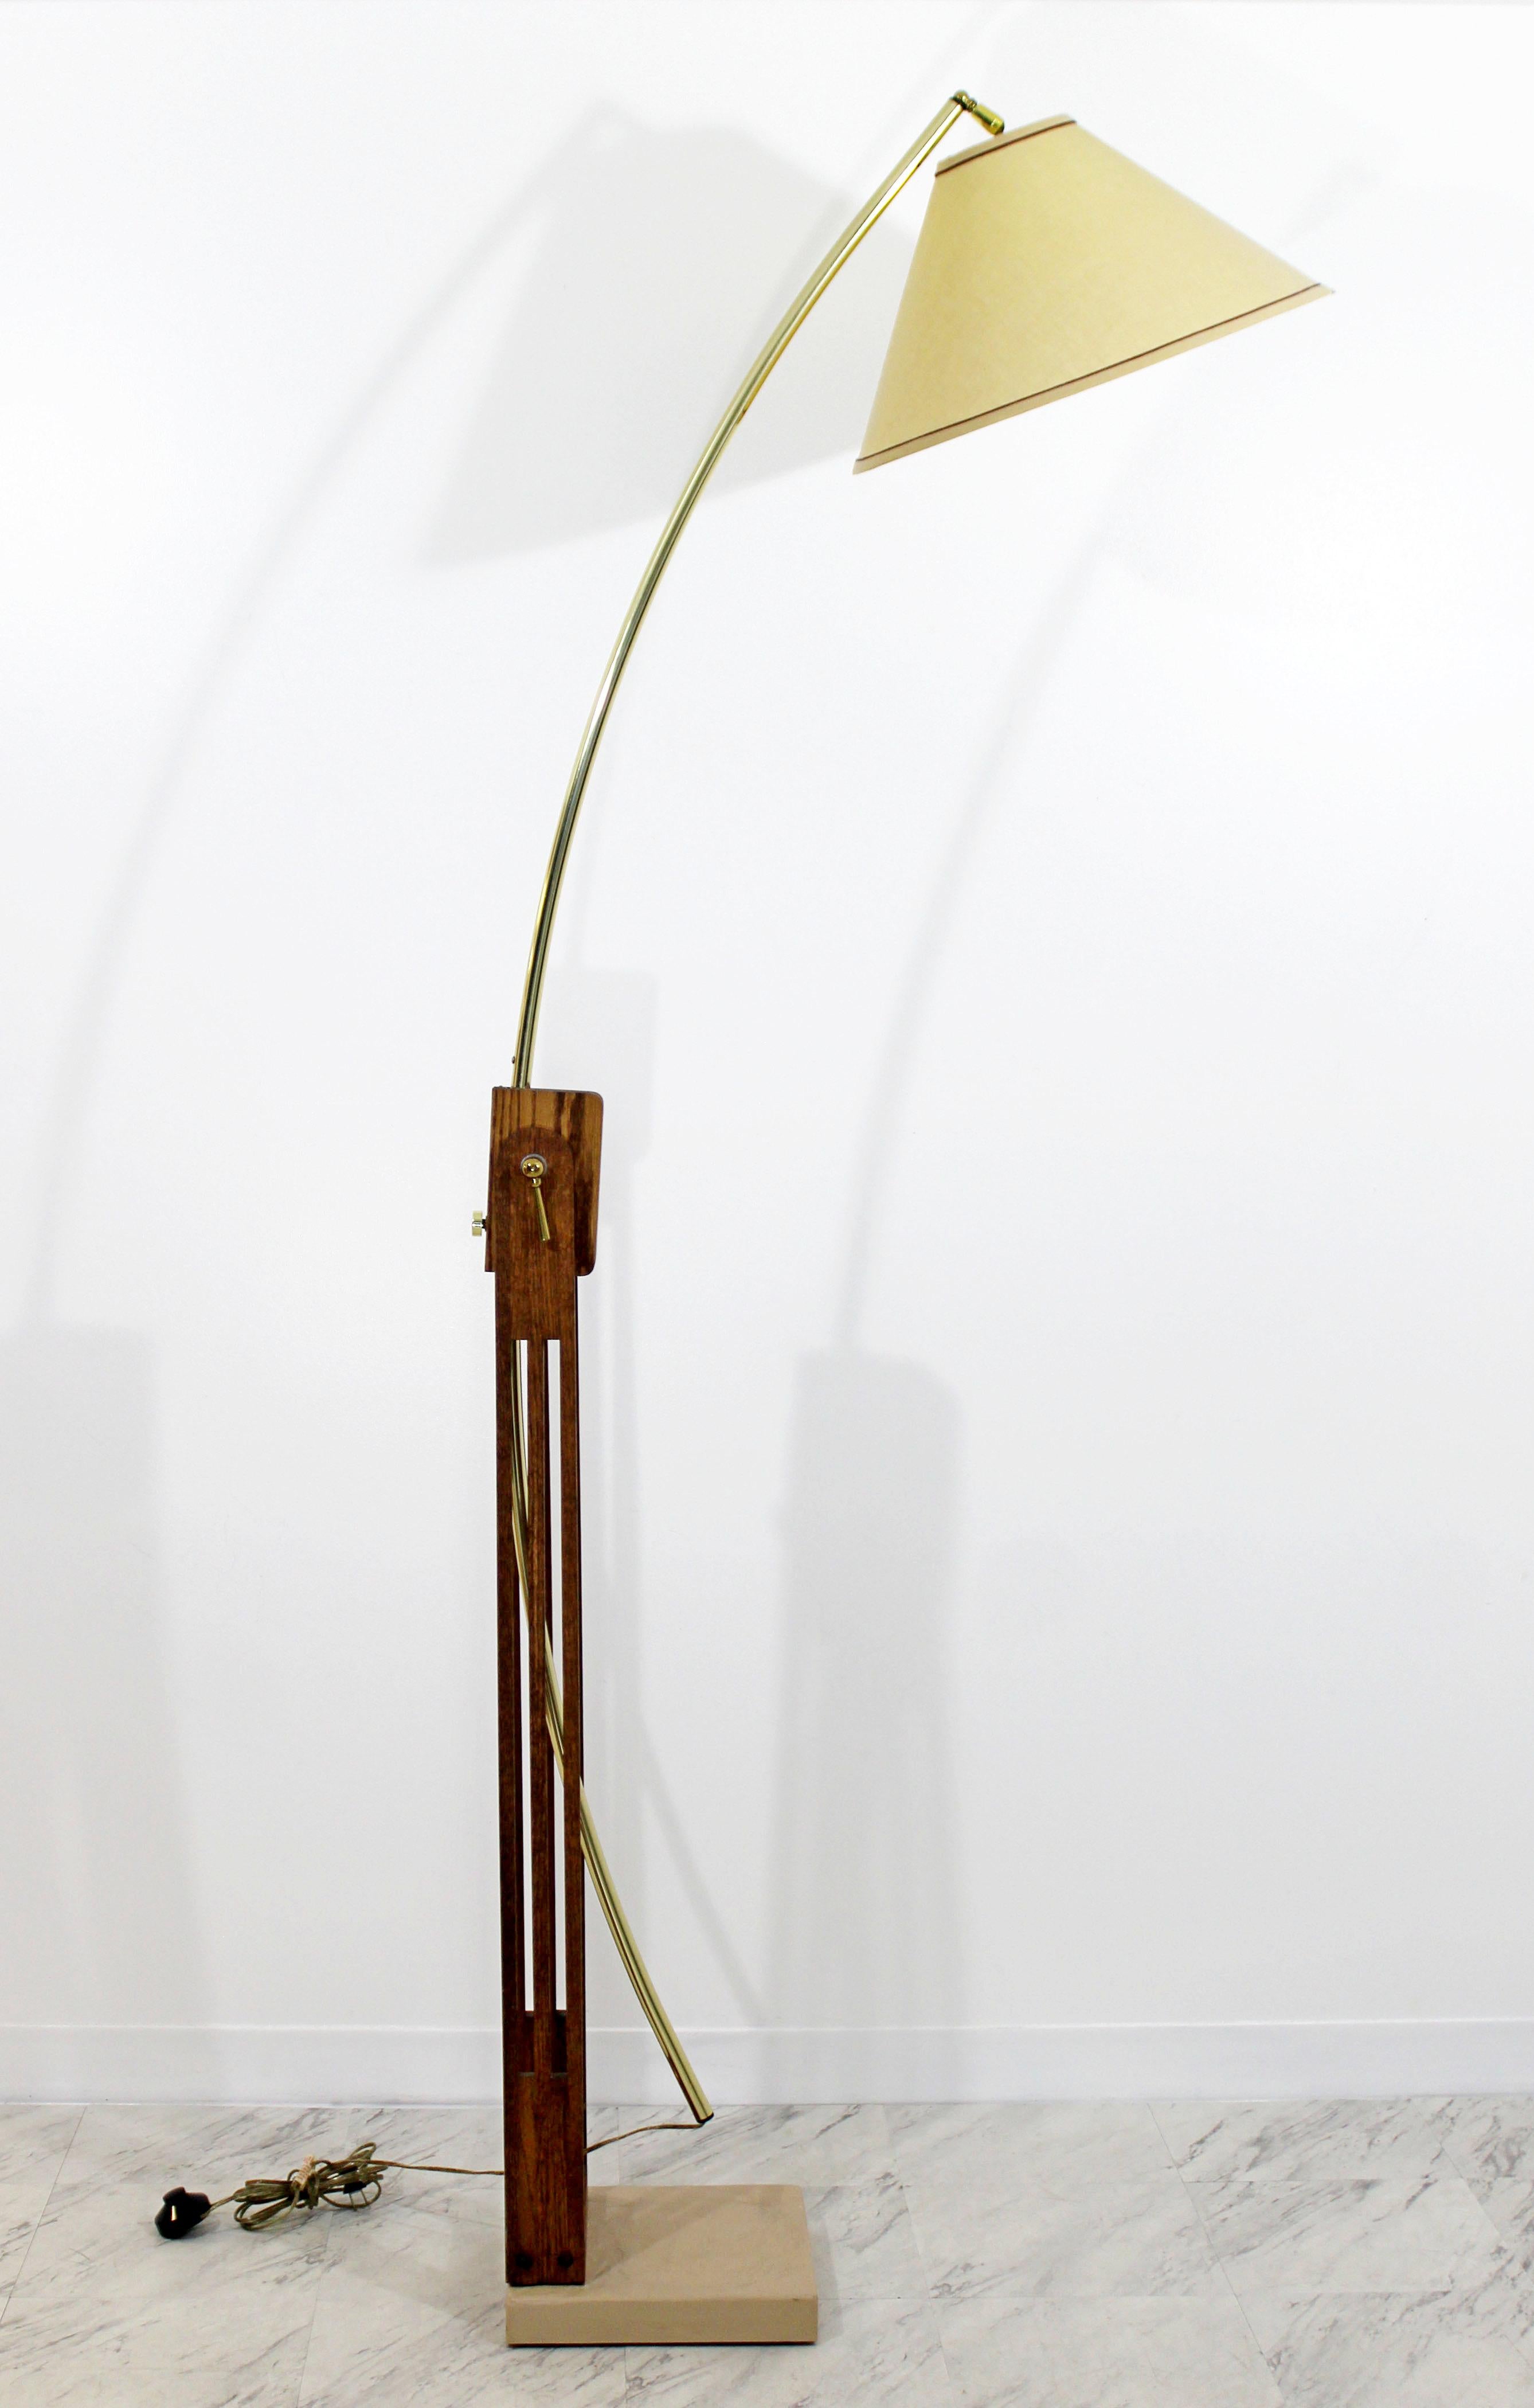 For your consideration is a phenomenal, large, wooden, arc floor lamp, with adjustable head and arm and brass knobs, circa the 1960s. In excellent condition. The dimensions are 84